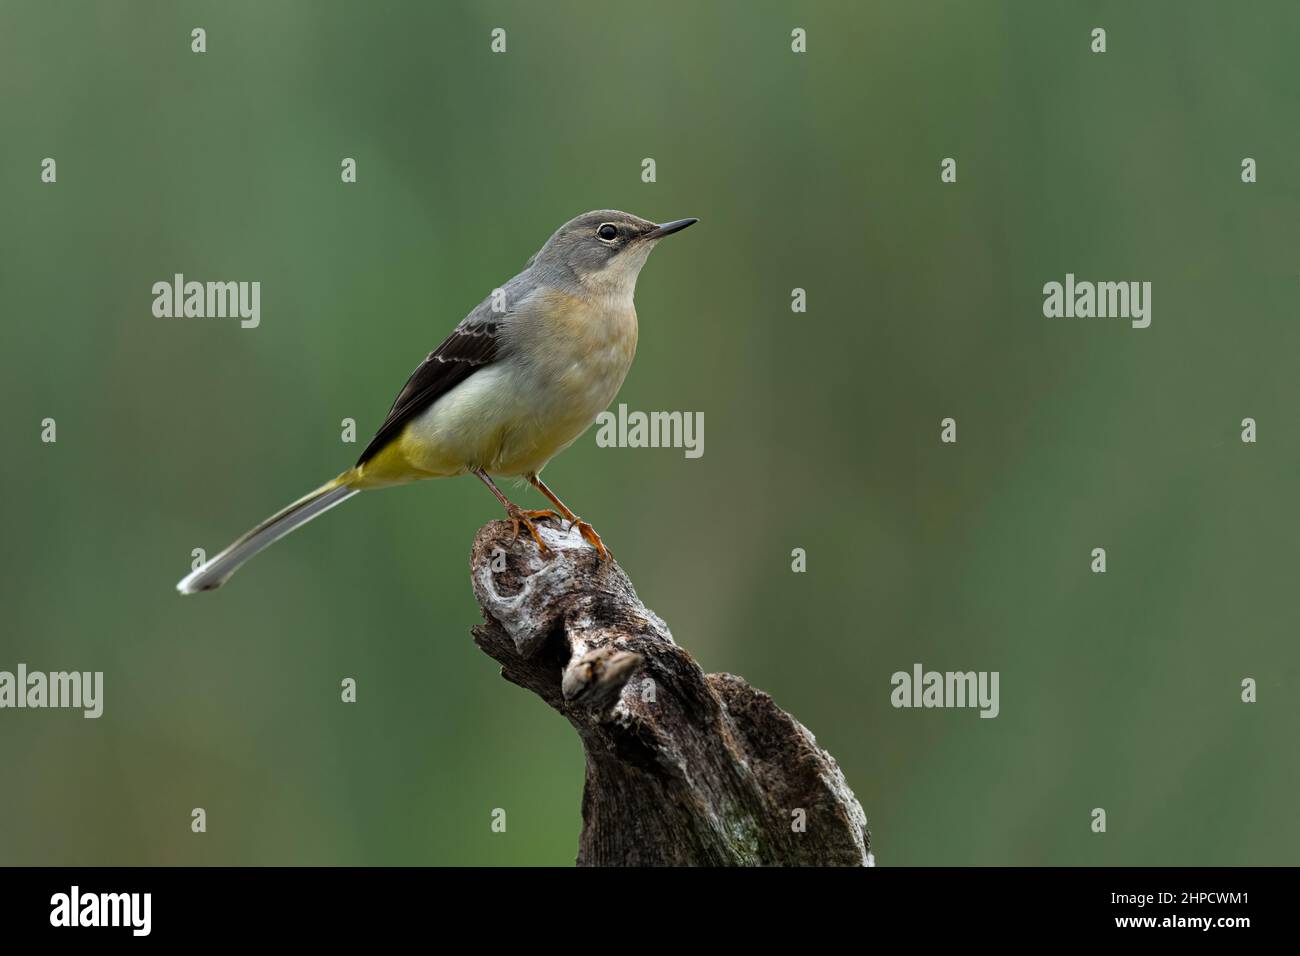 Perched on an old tree stump is a grey wagtail. It is set against a natural out of focus background Stock Photo